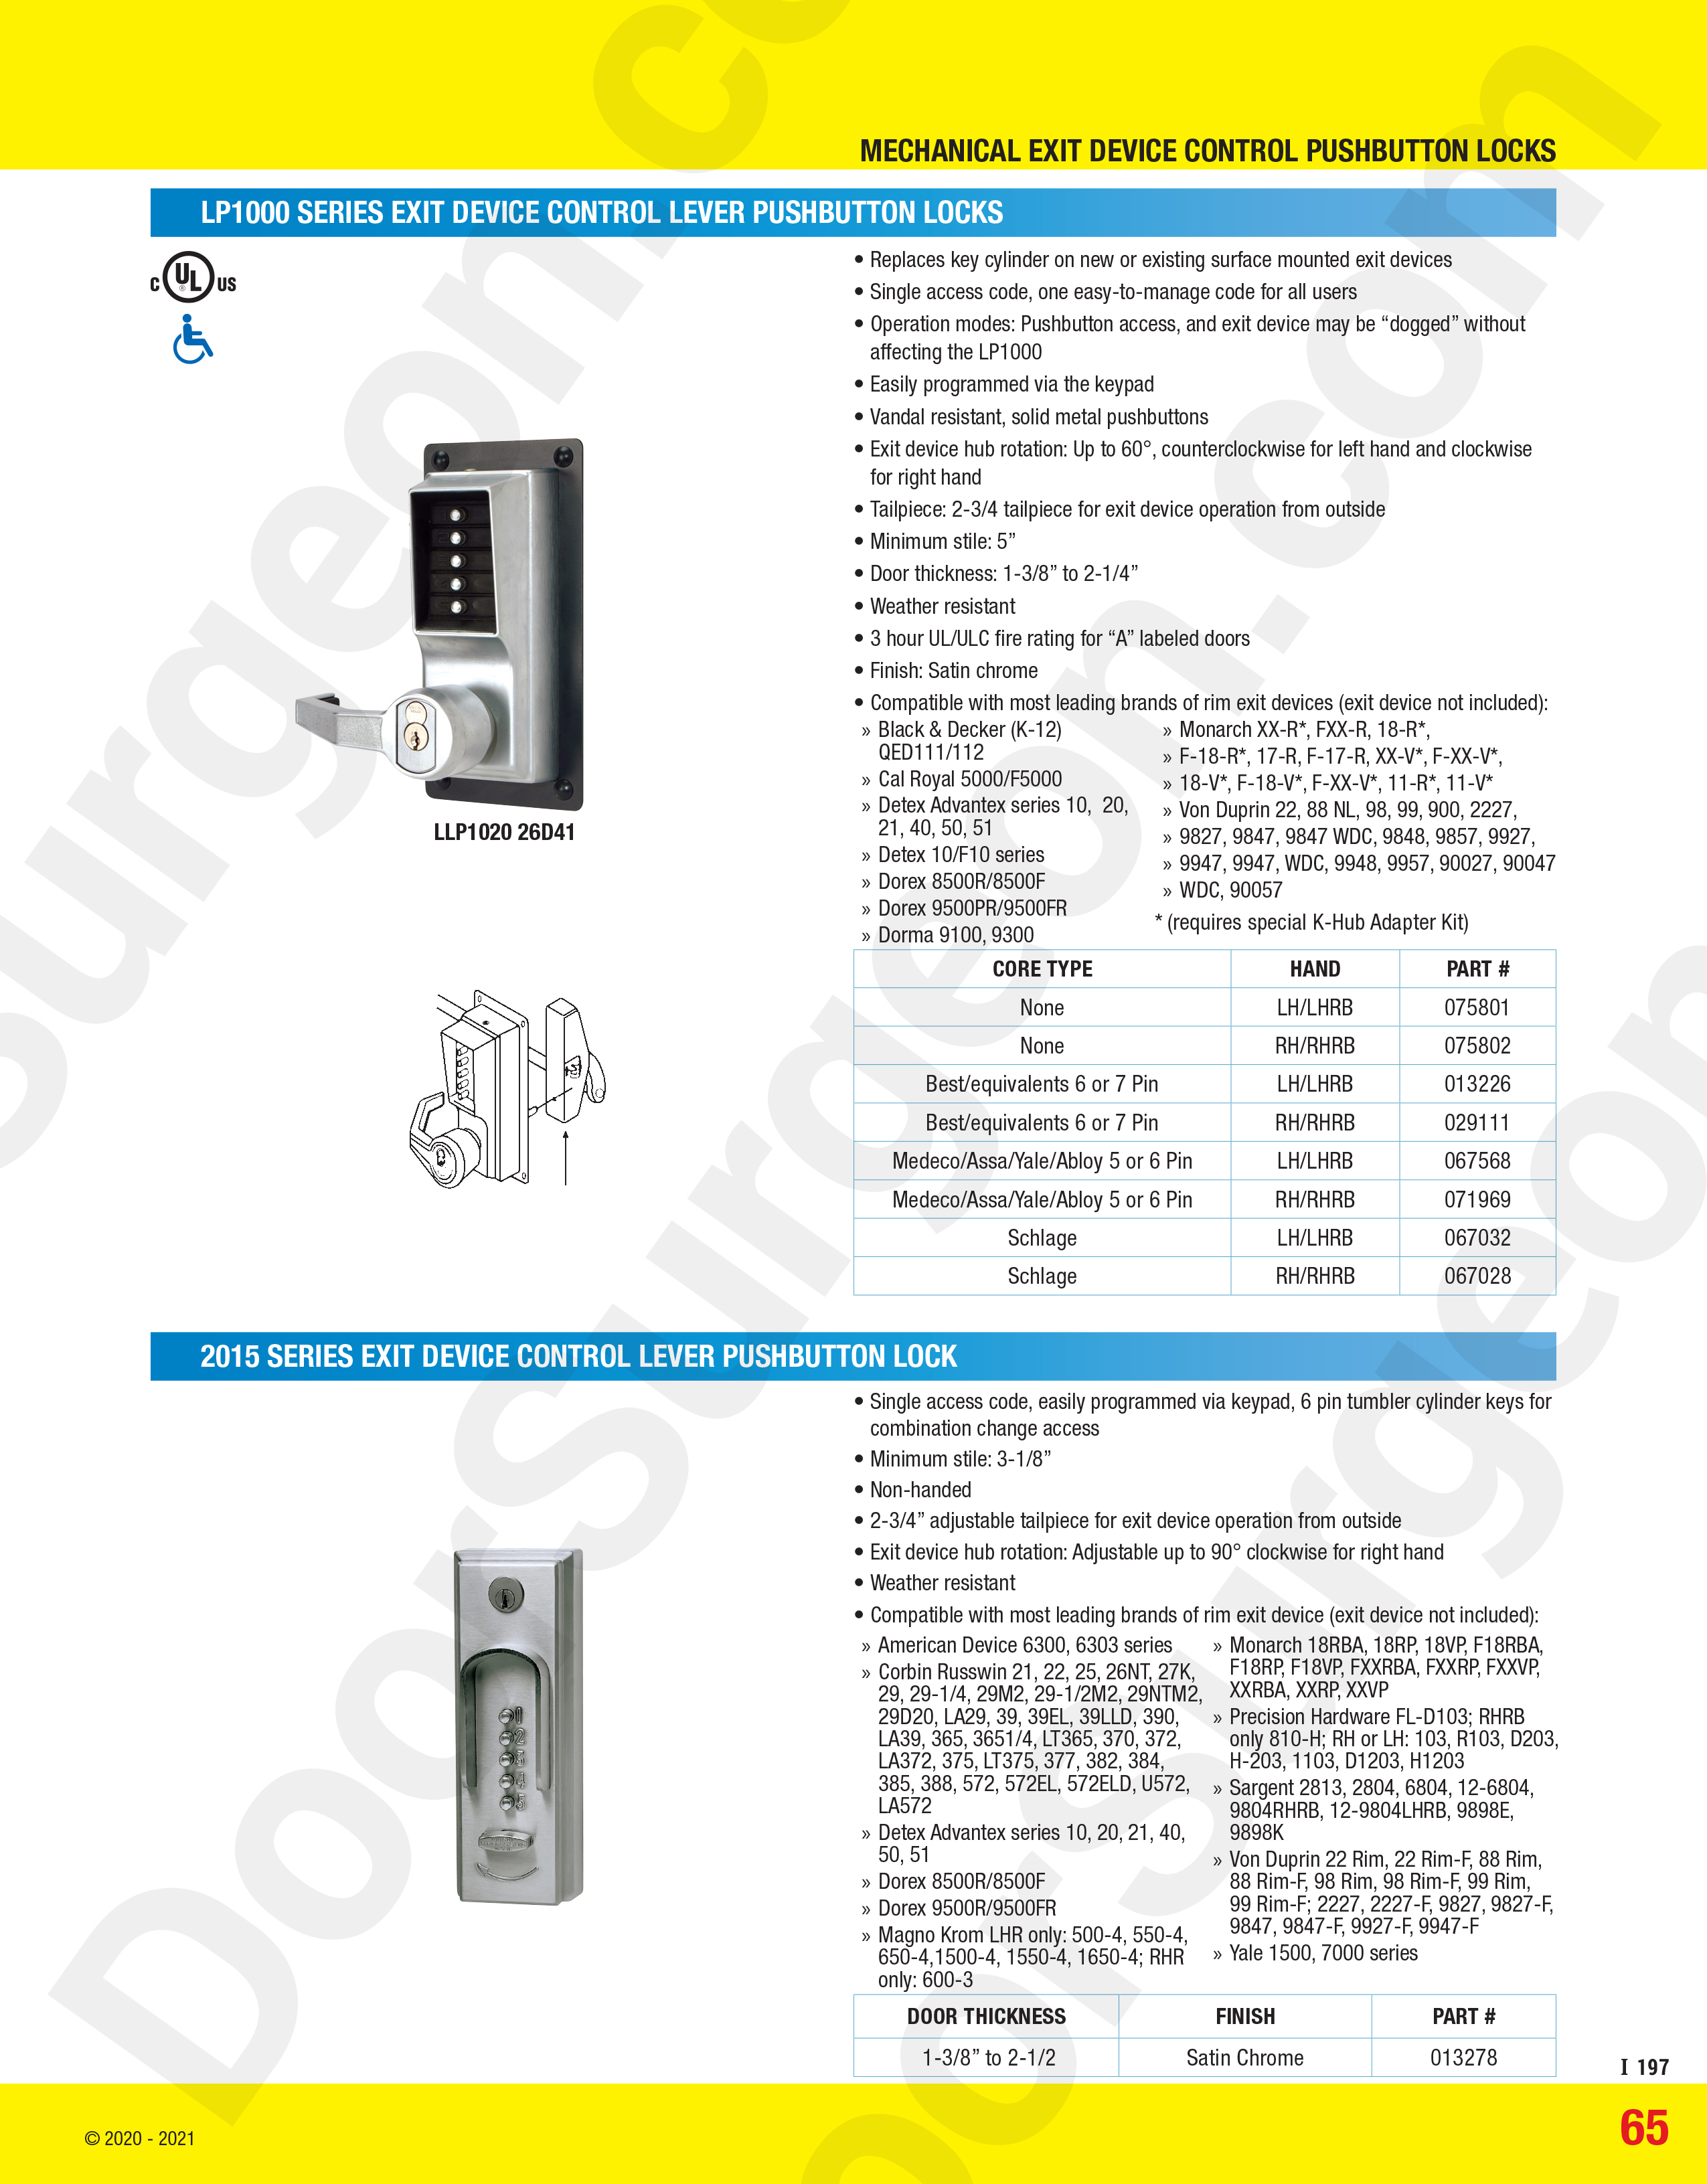 Simplex Dormakaba LP1000 series exit device control lever push-button lock to work with panic bar.